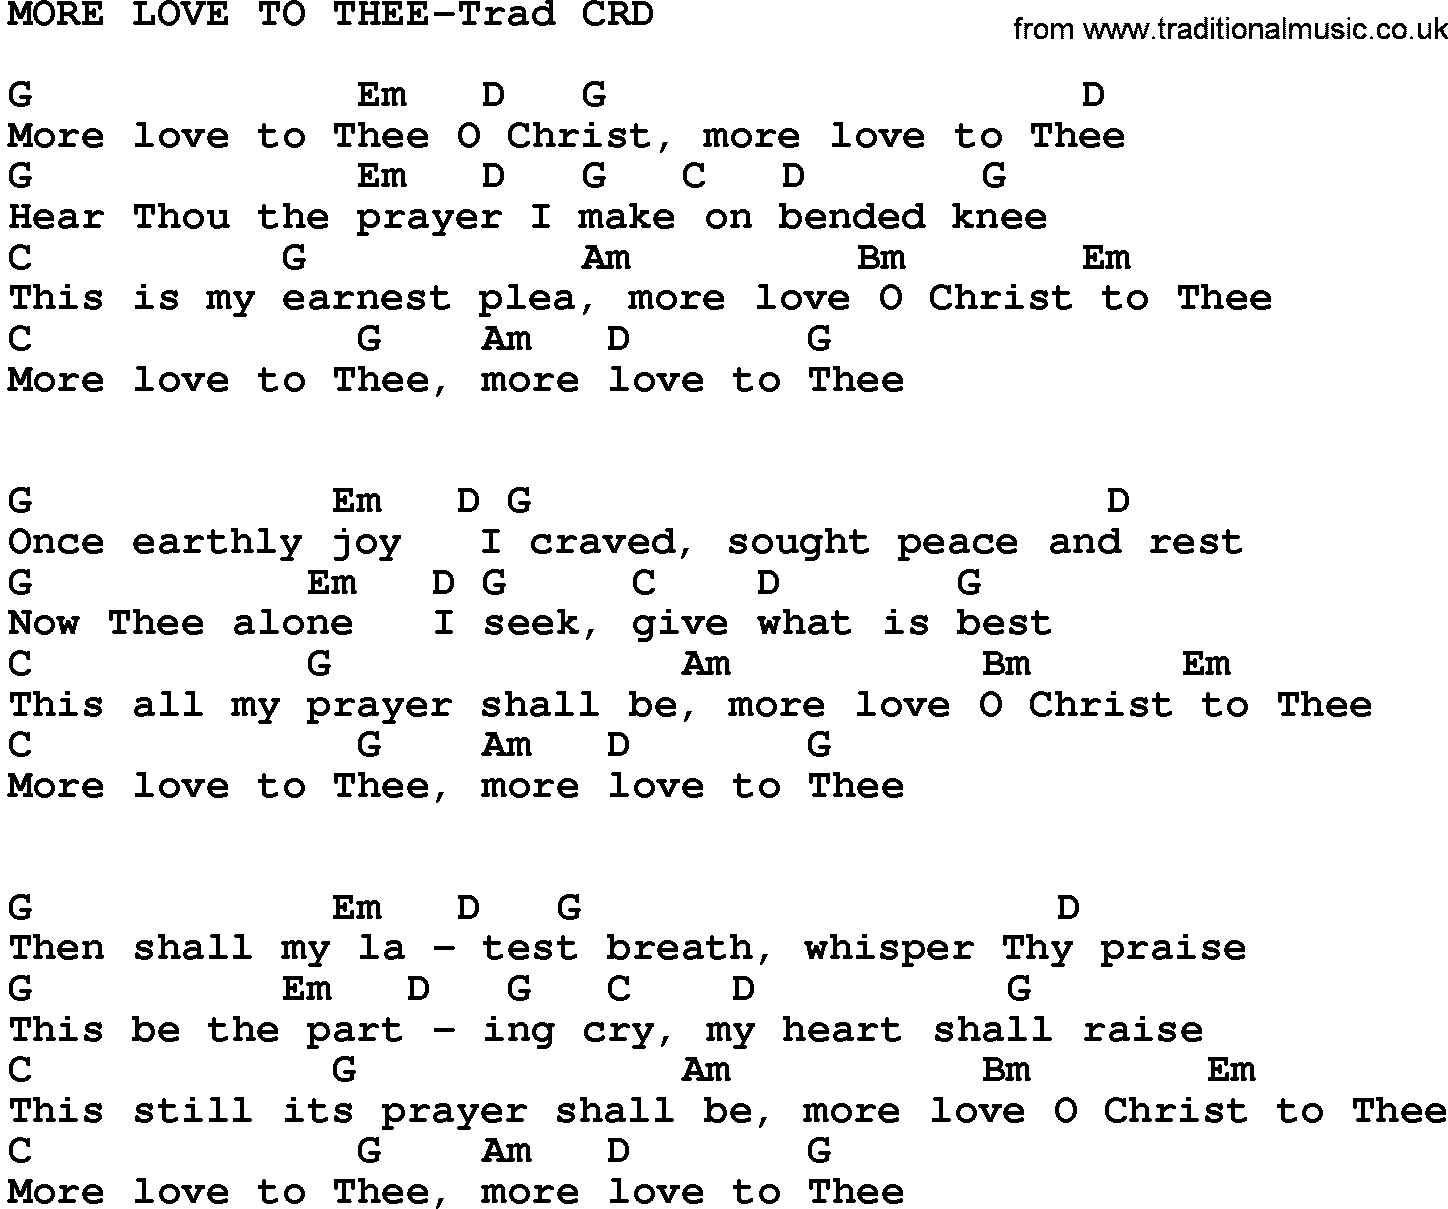 Gospel Song: More Love To Thee-Trad, lyrics and chords.